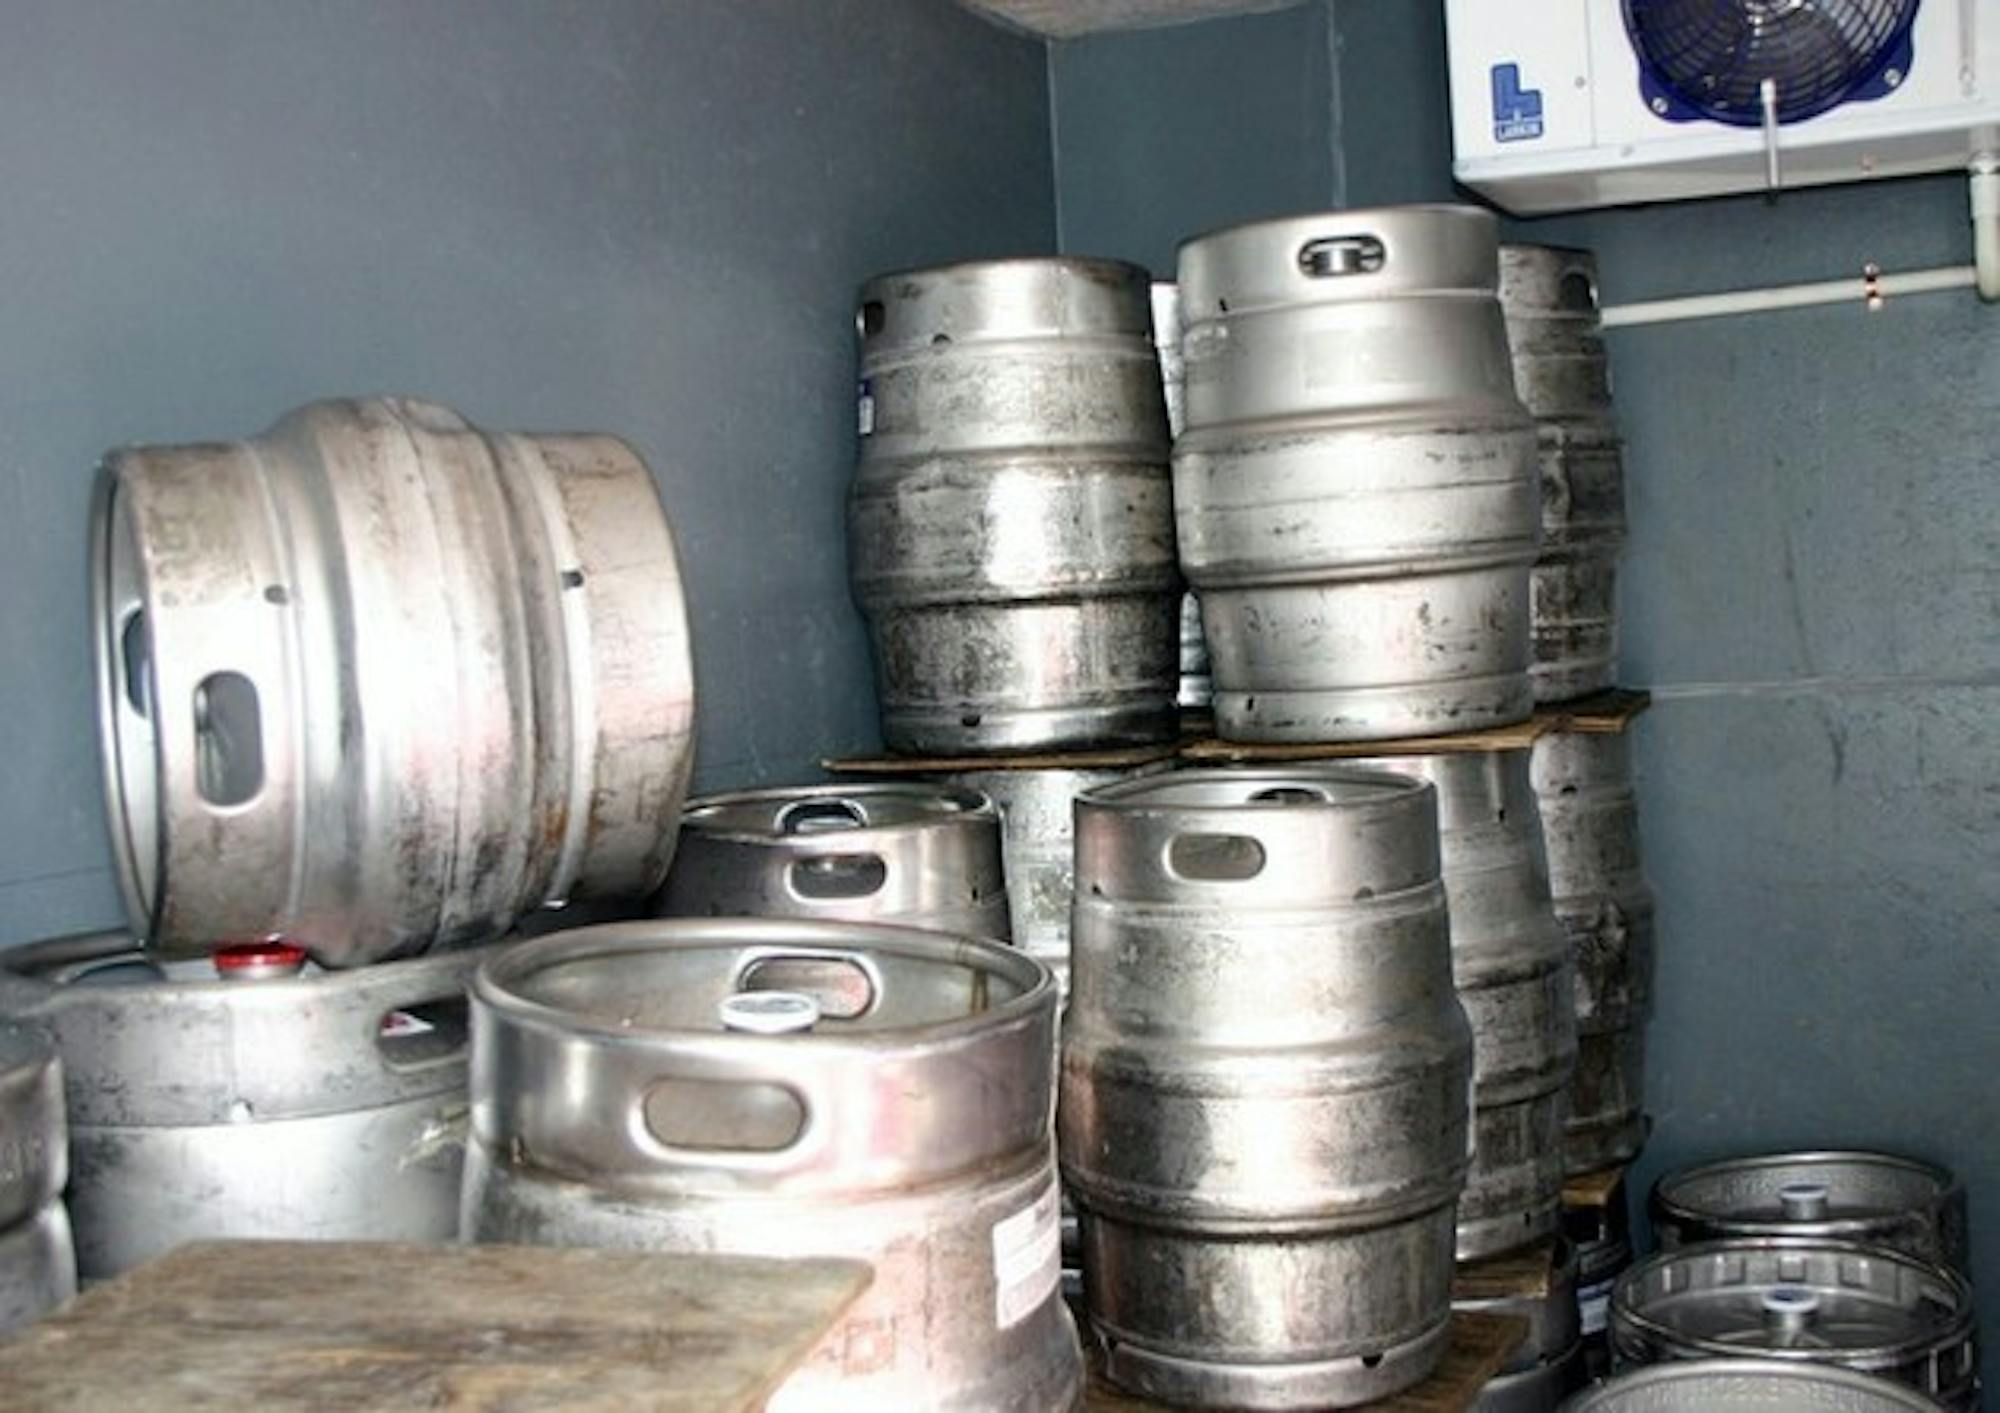 New SEMP guidelines ease exemptions for using kegs at outdoor events,